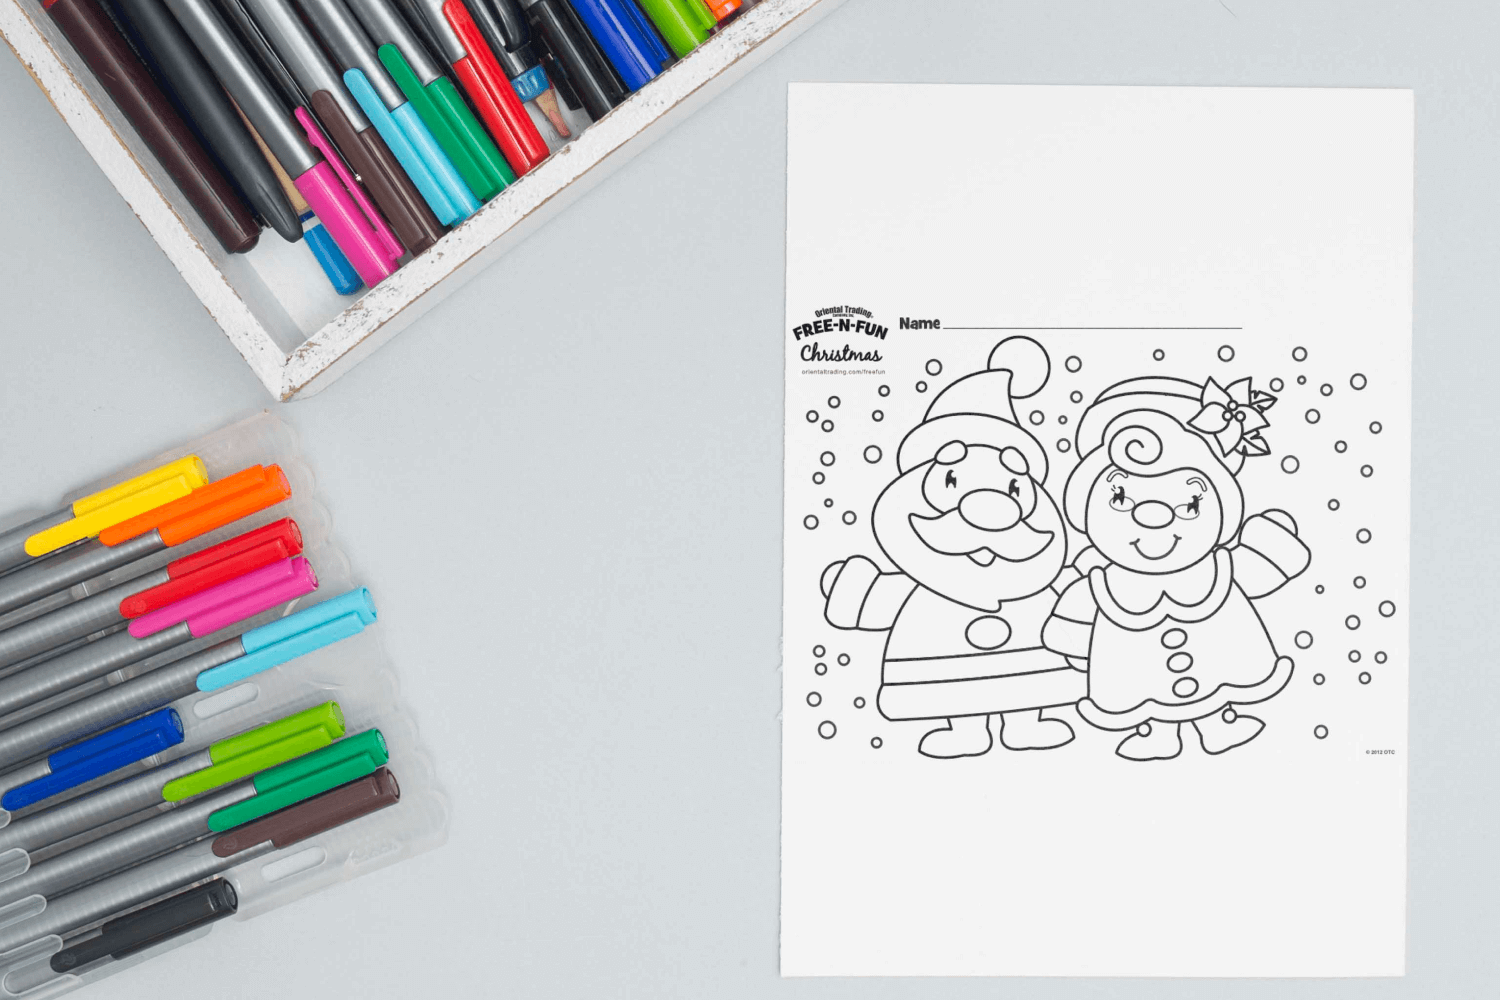 Mr Mrs Claus coloring page facebook image.